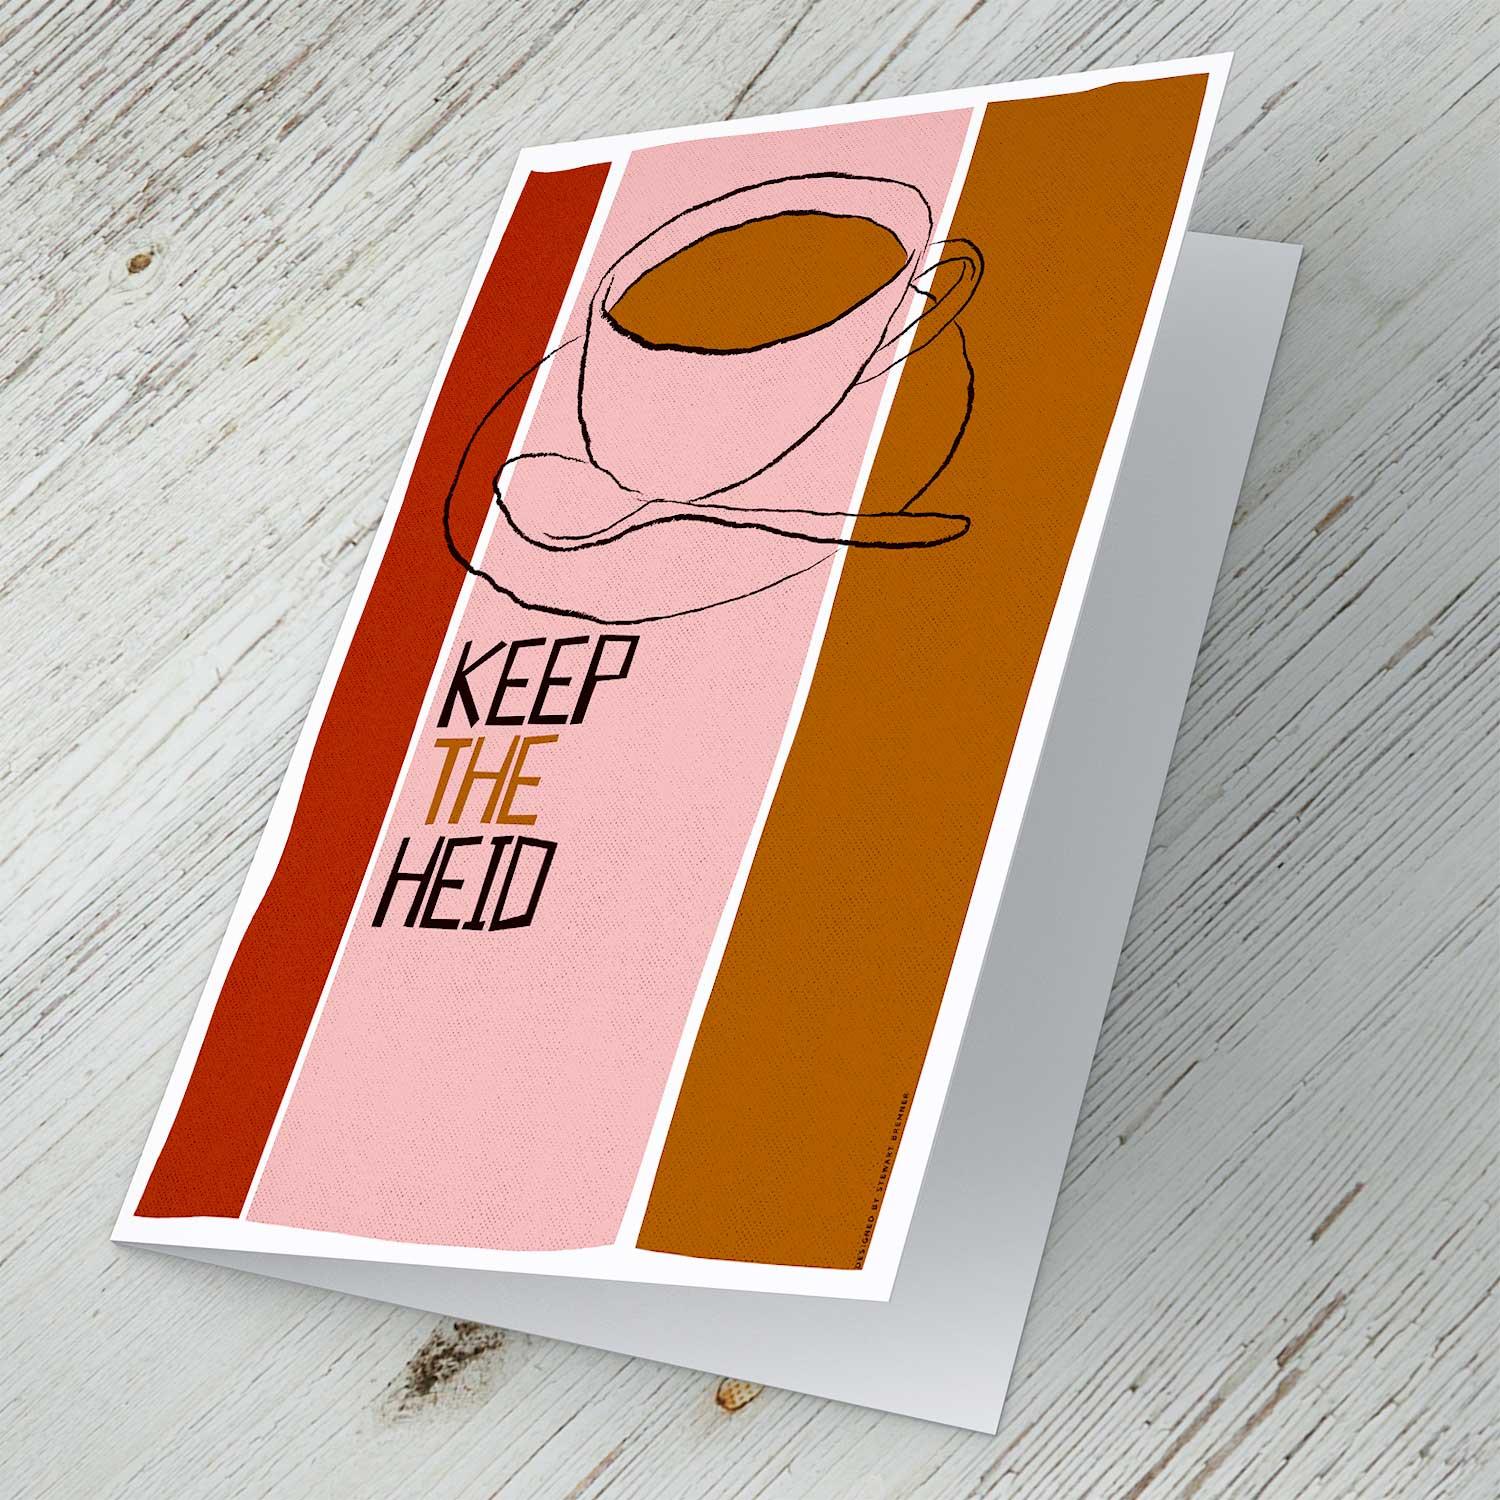 Keep the Heid Greeting Card from an original painting by artist Stewart Bremner